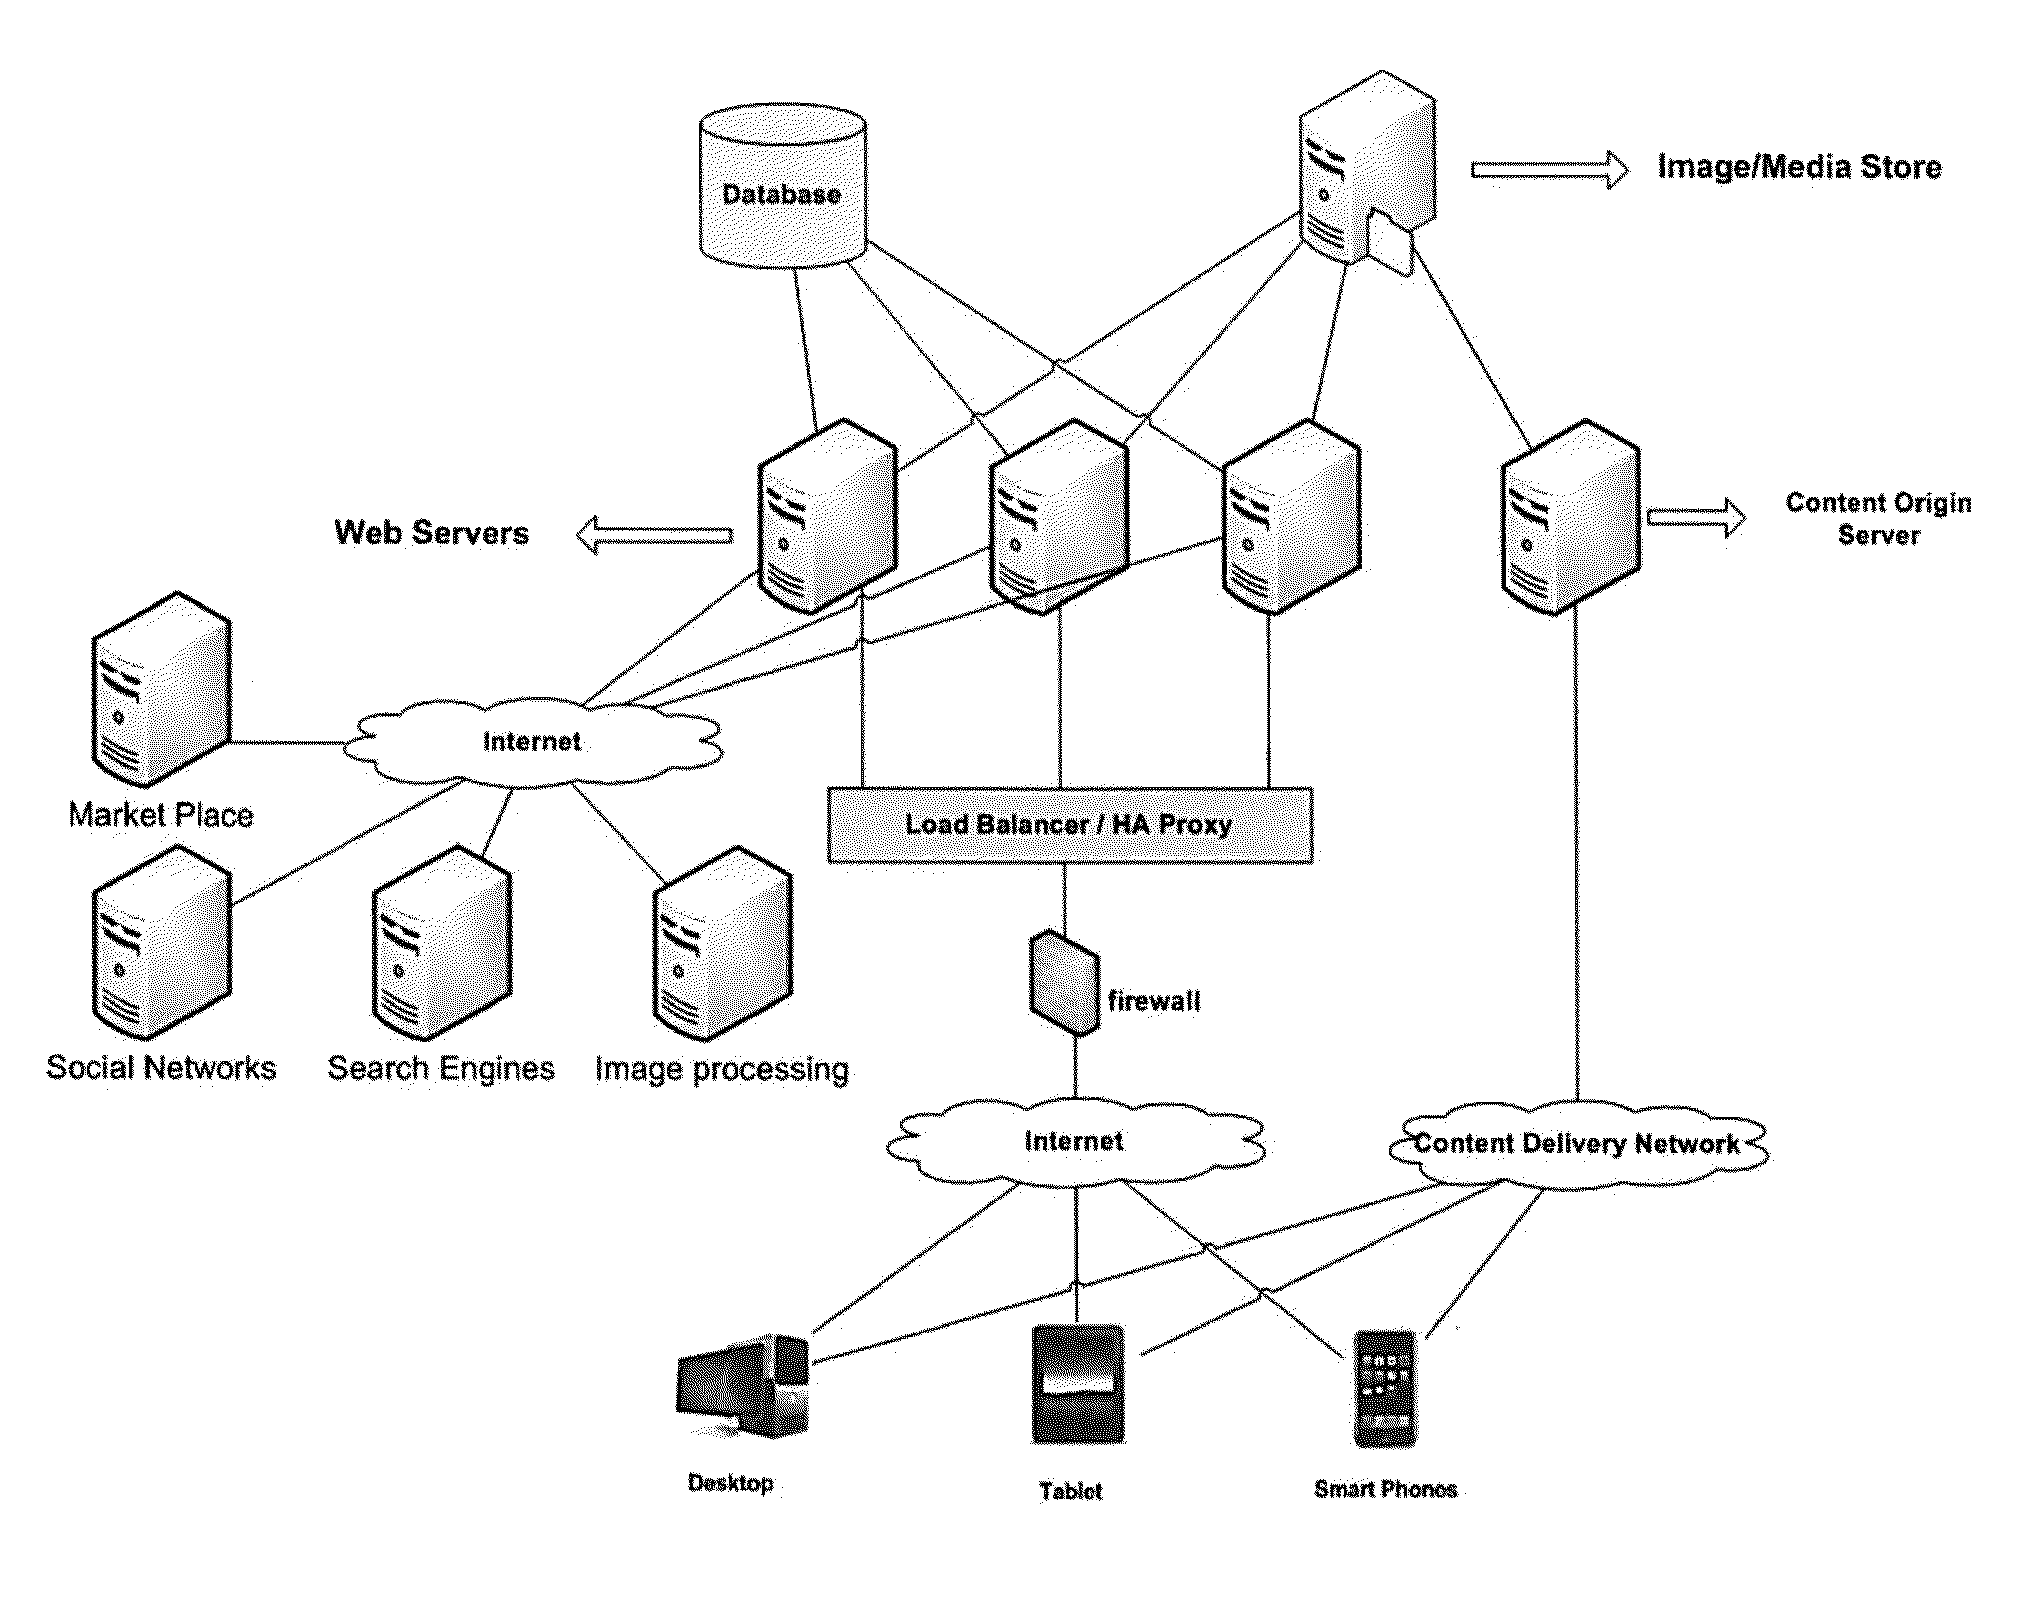 Systems and Methods for Event Networking and Media Sharing